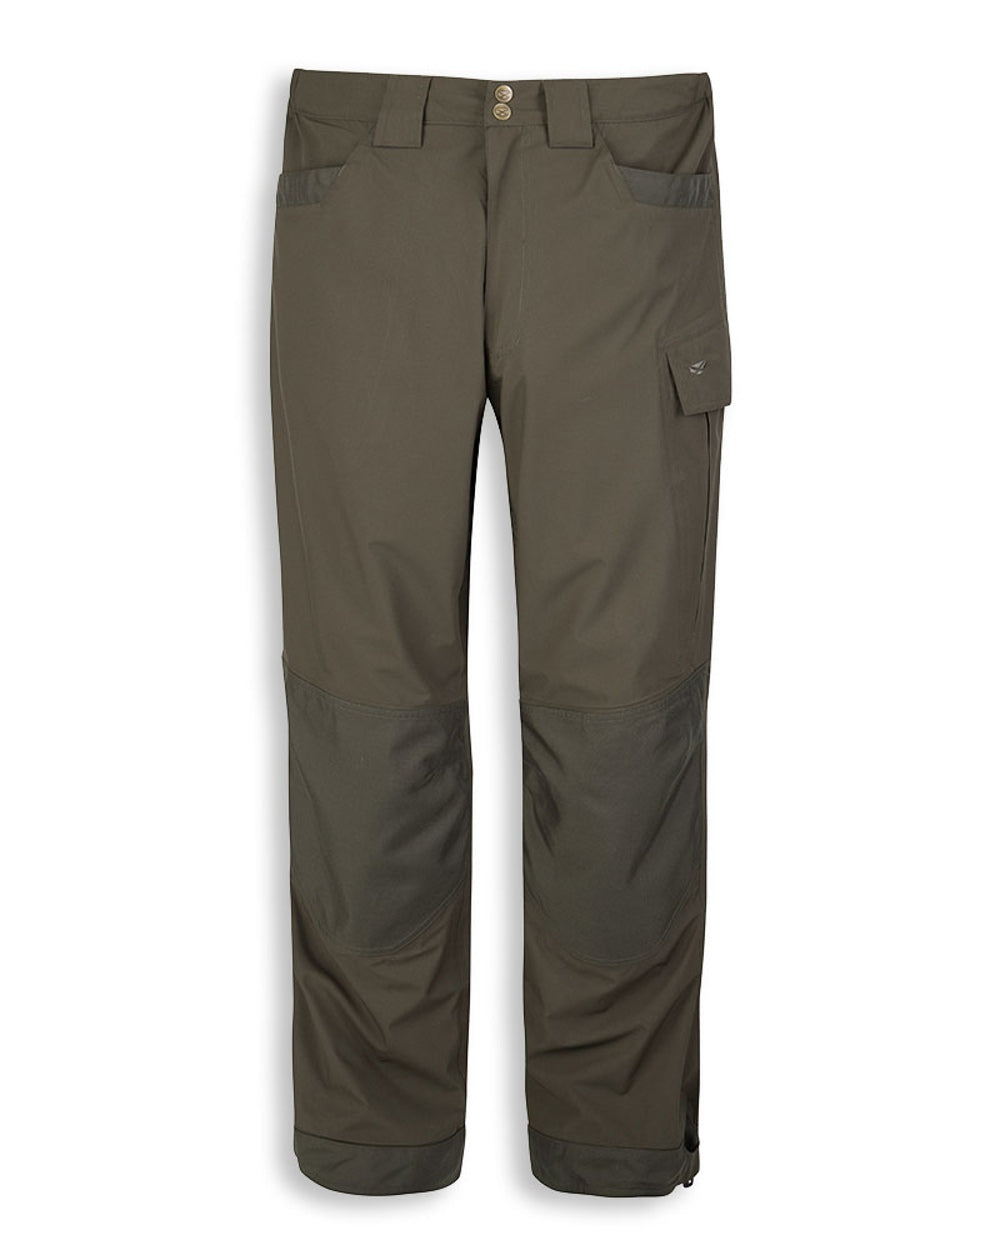 Fen Green coloured Hoggs of Fife Culloden Waterproof Trousers on white background